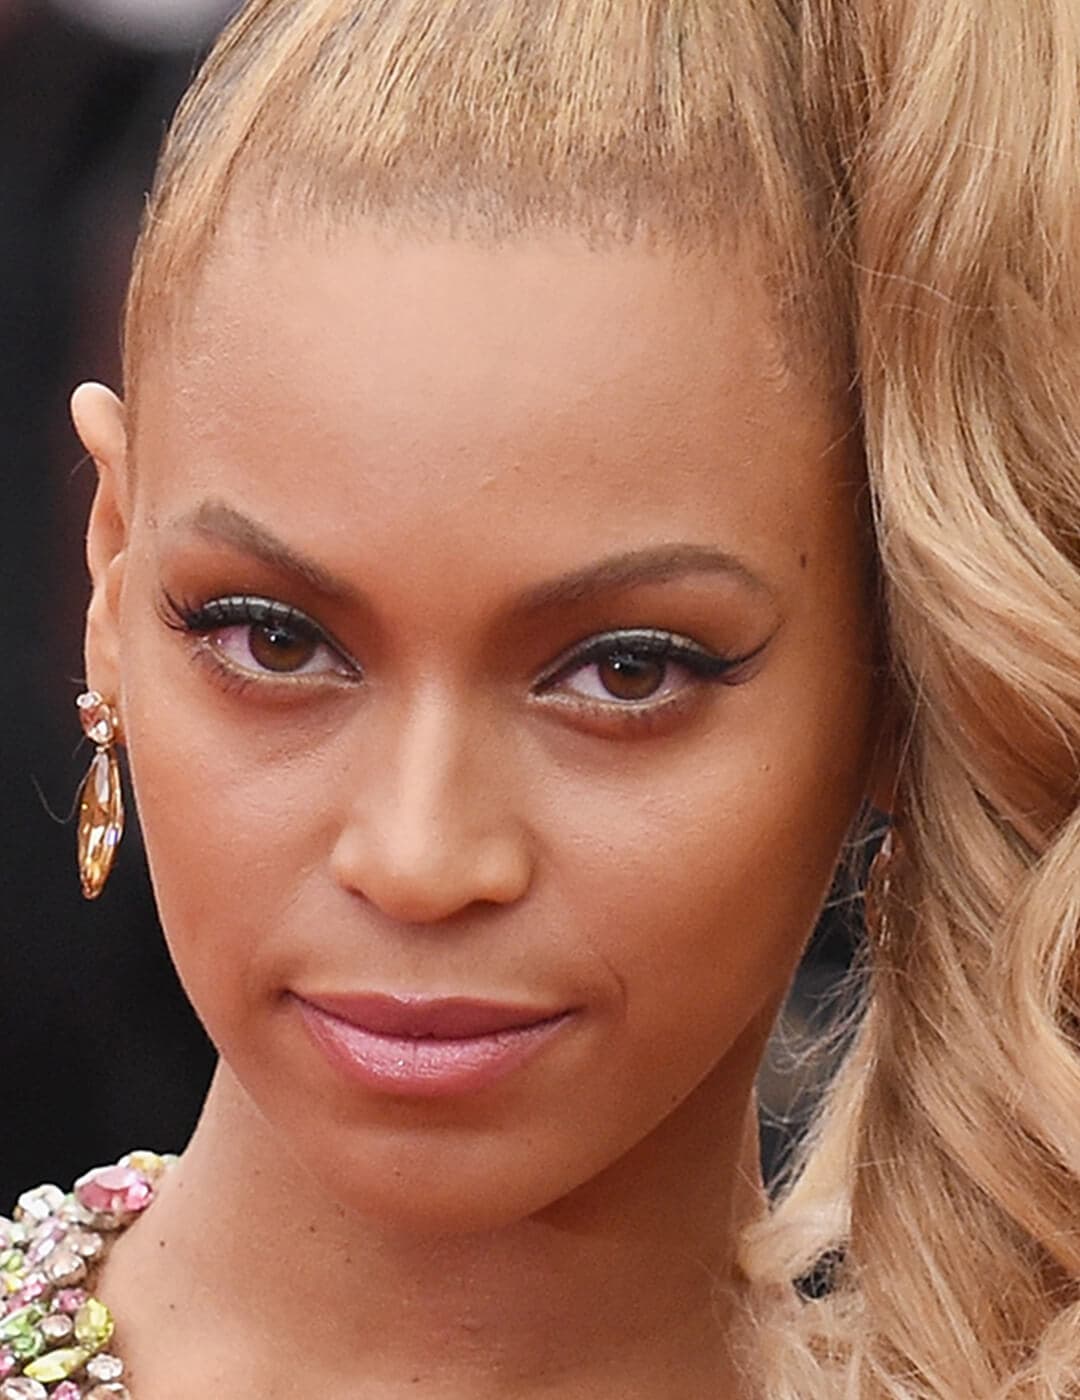 Beyonce looking glam in a high ponytail hairstyle, natural makeup look, and colorful stones dress